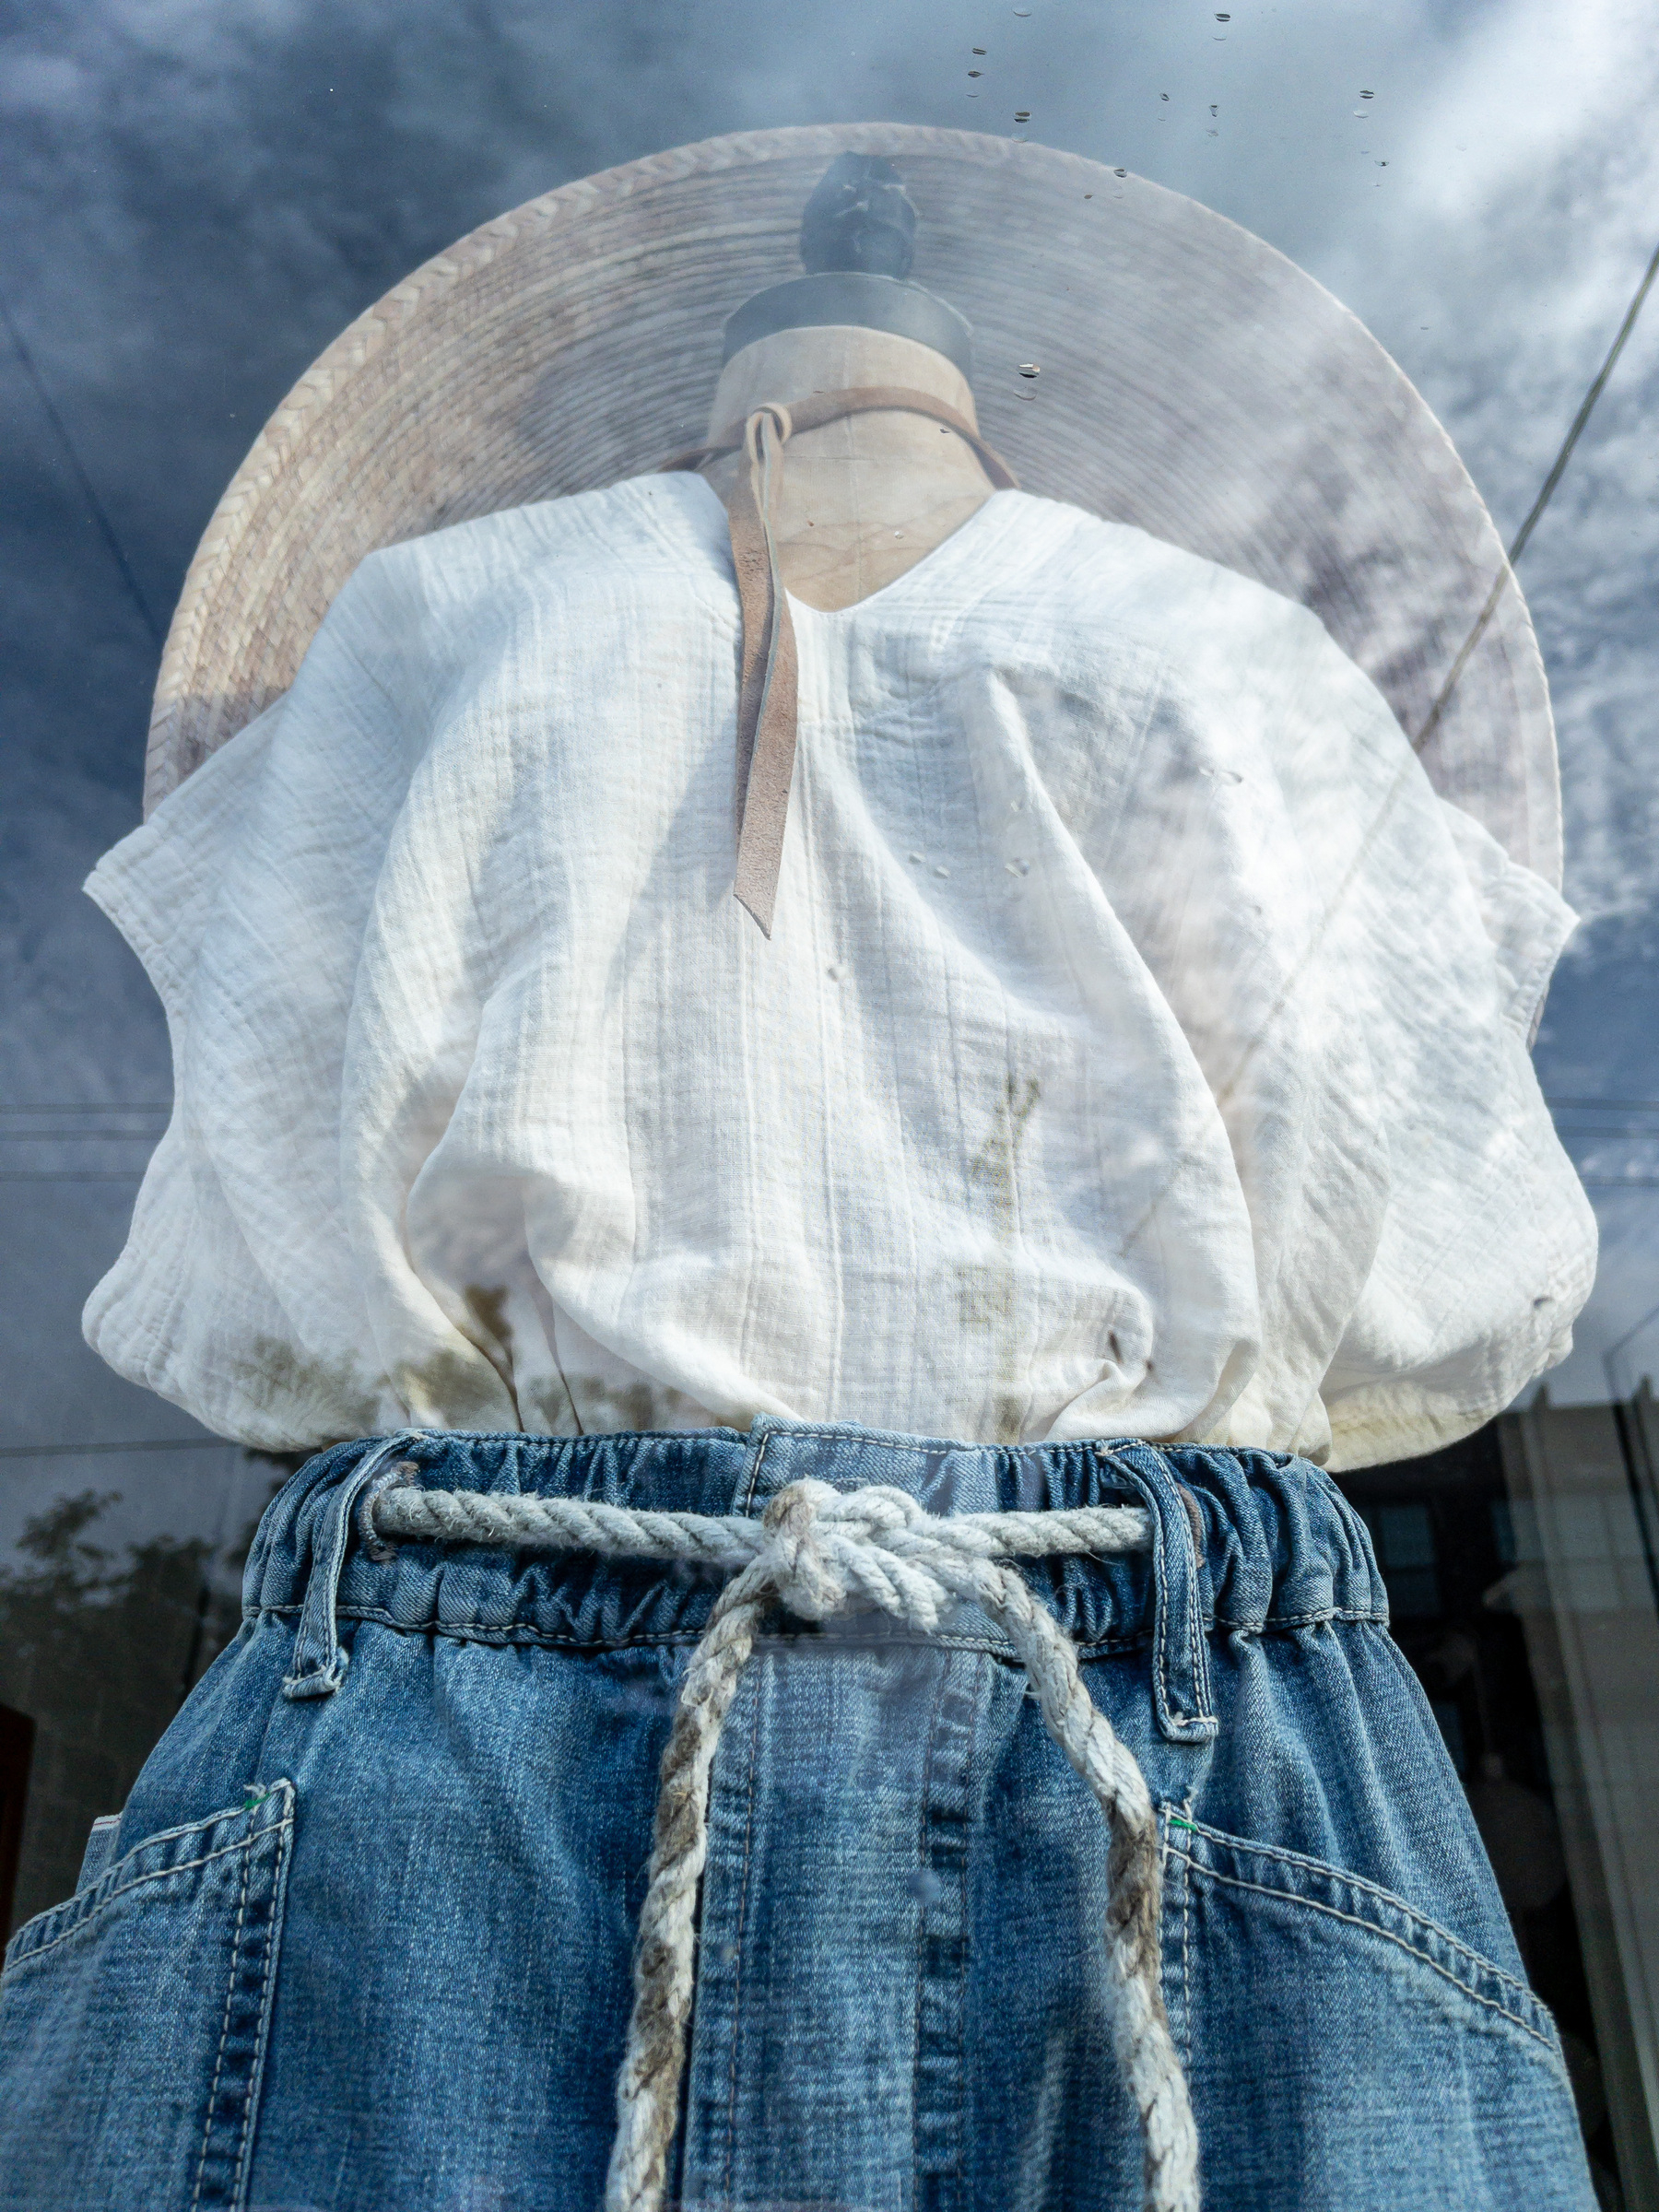 Blue jeans, rope belt, white linen blouse and broad brim hat in shop window with partially cloudy sky reflection overlaid.